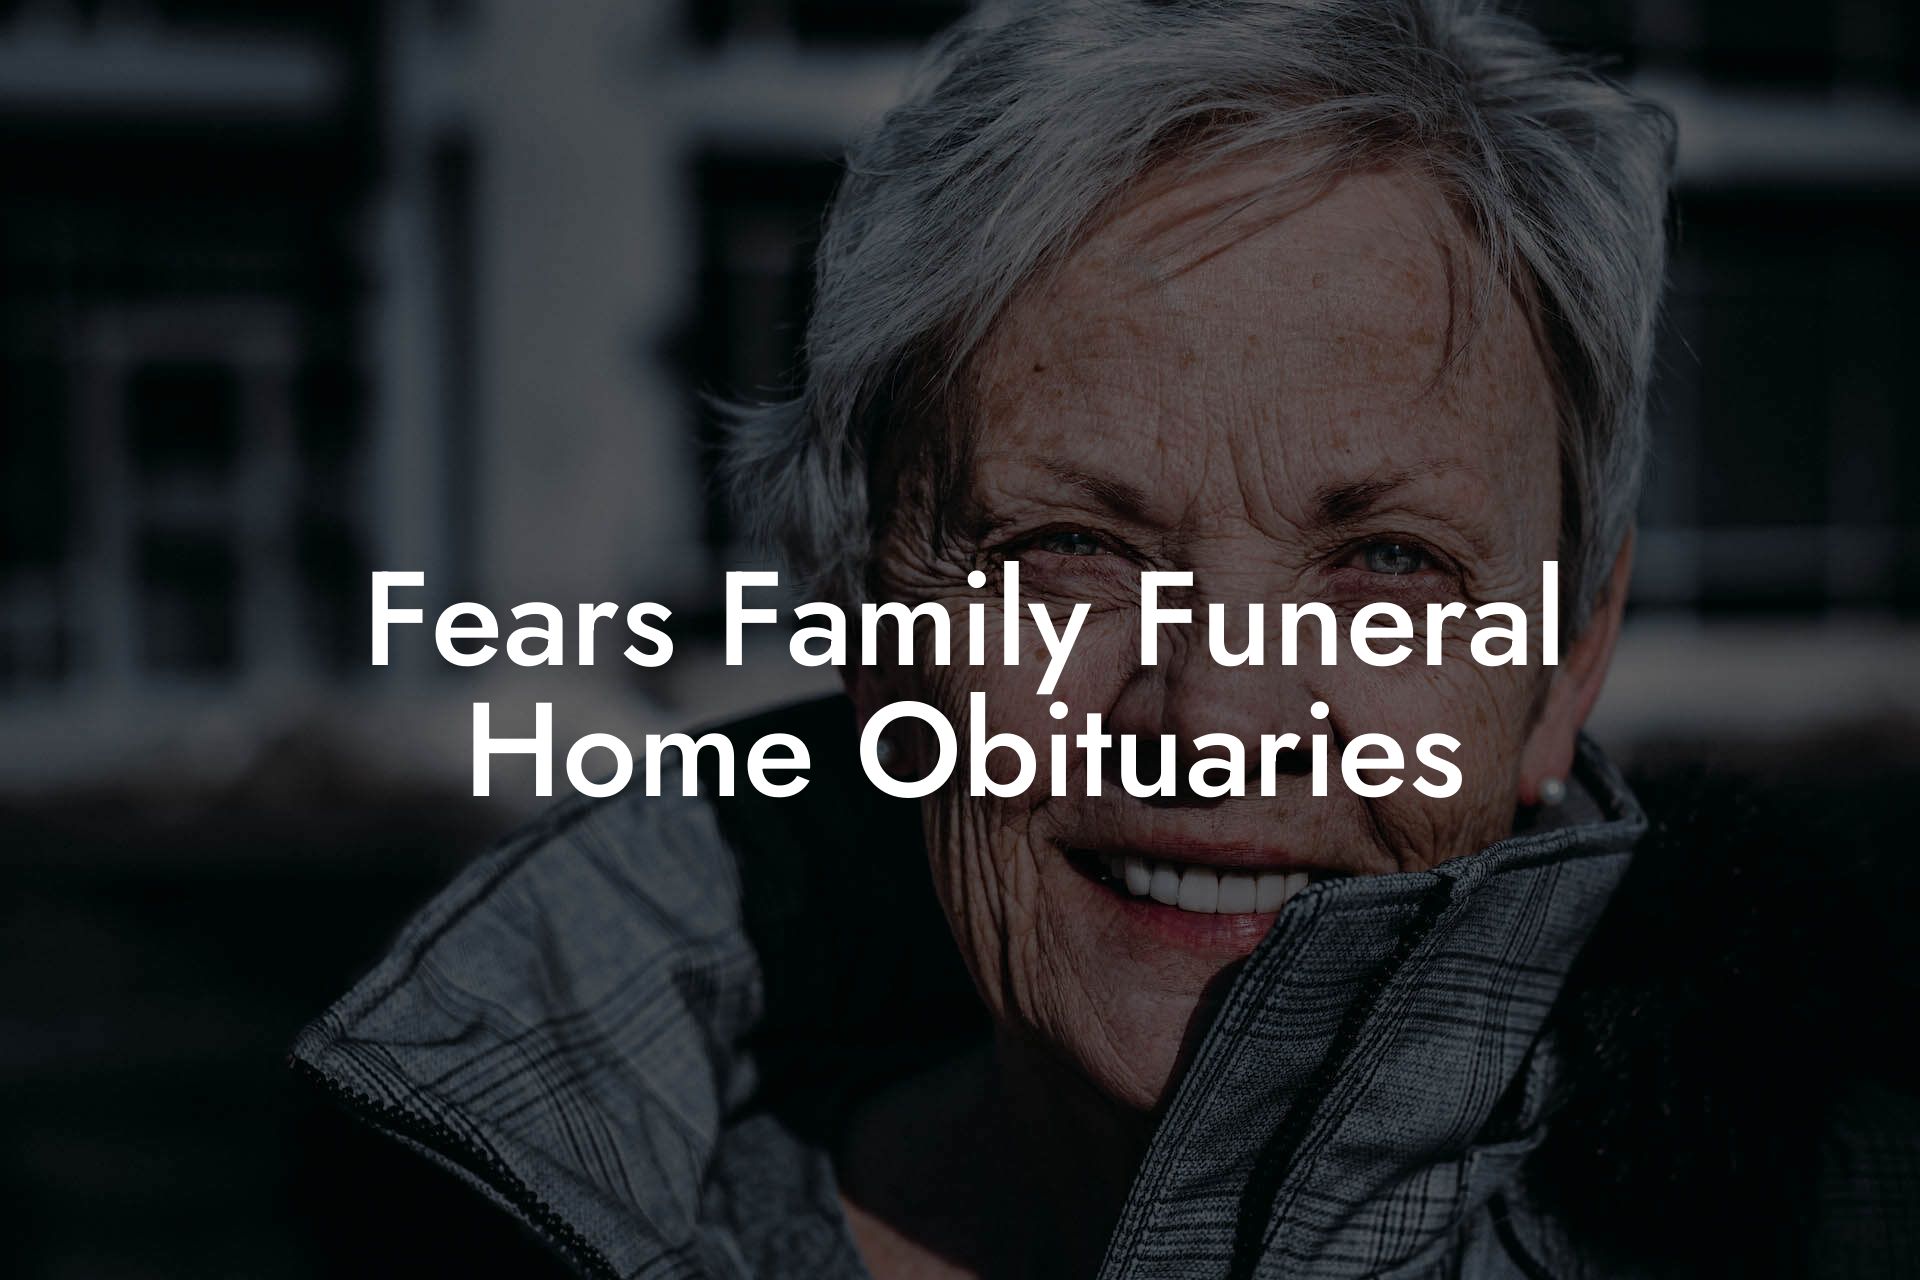 Fears Family Funeral Home Obituaries